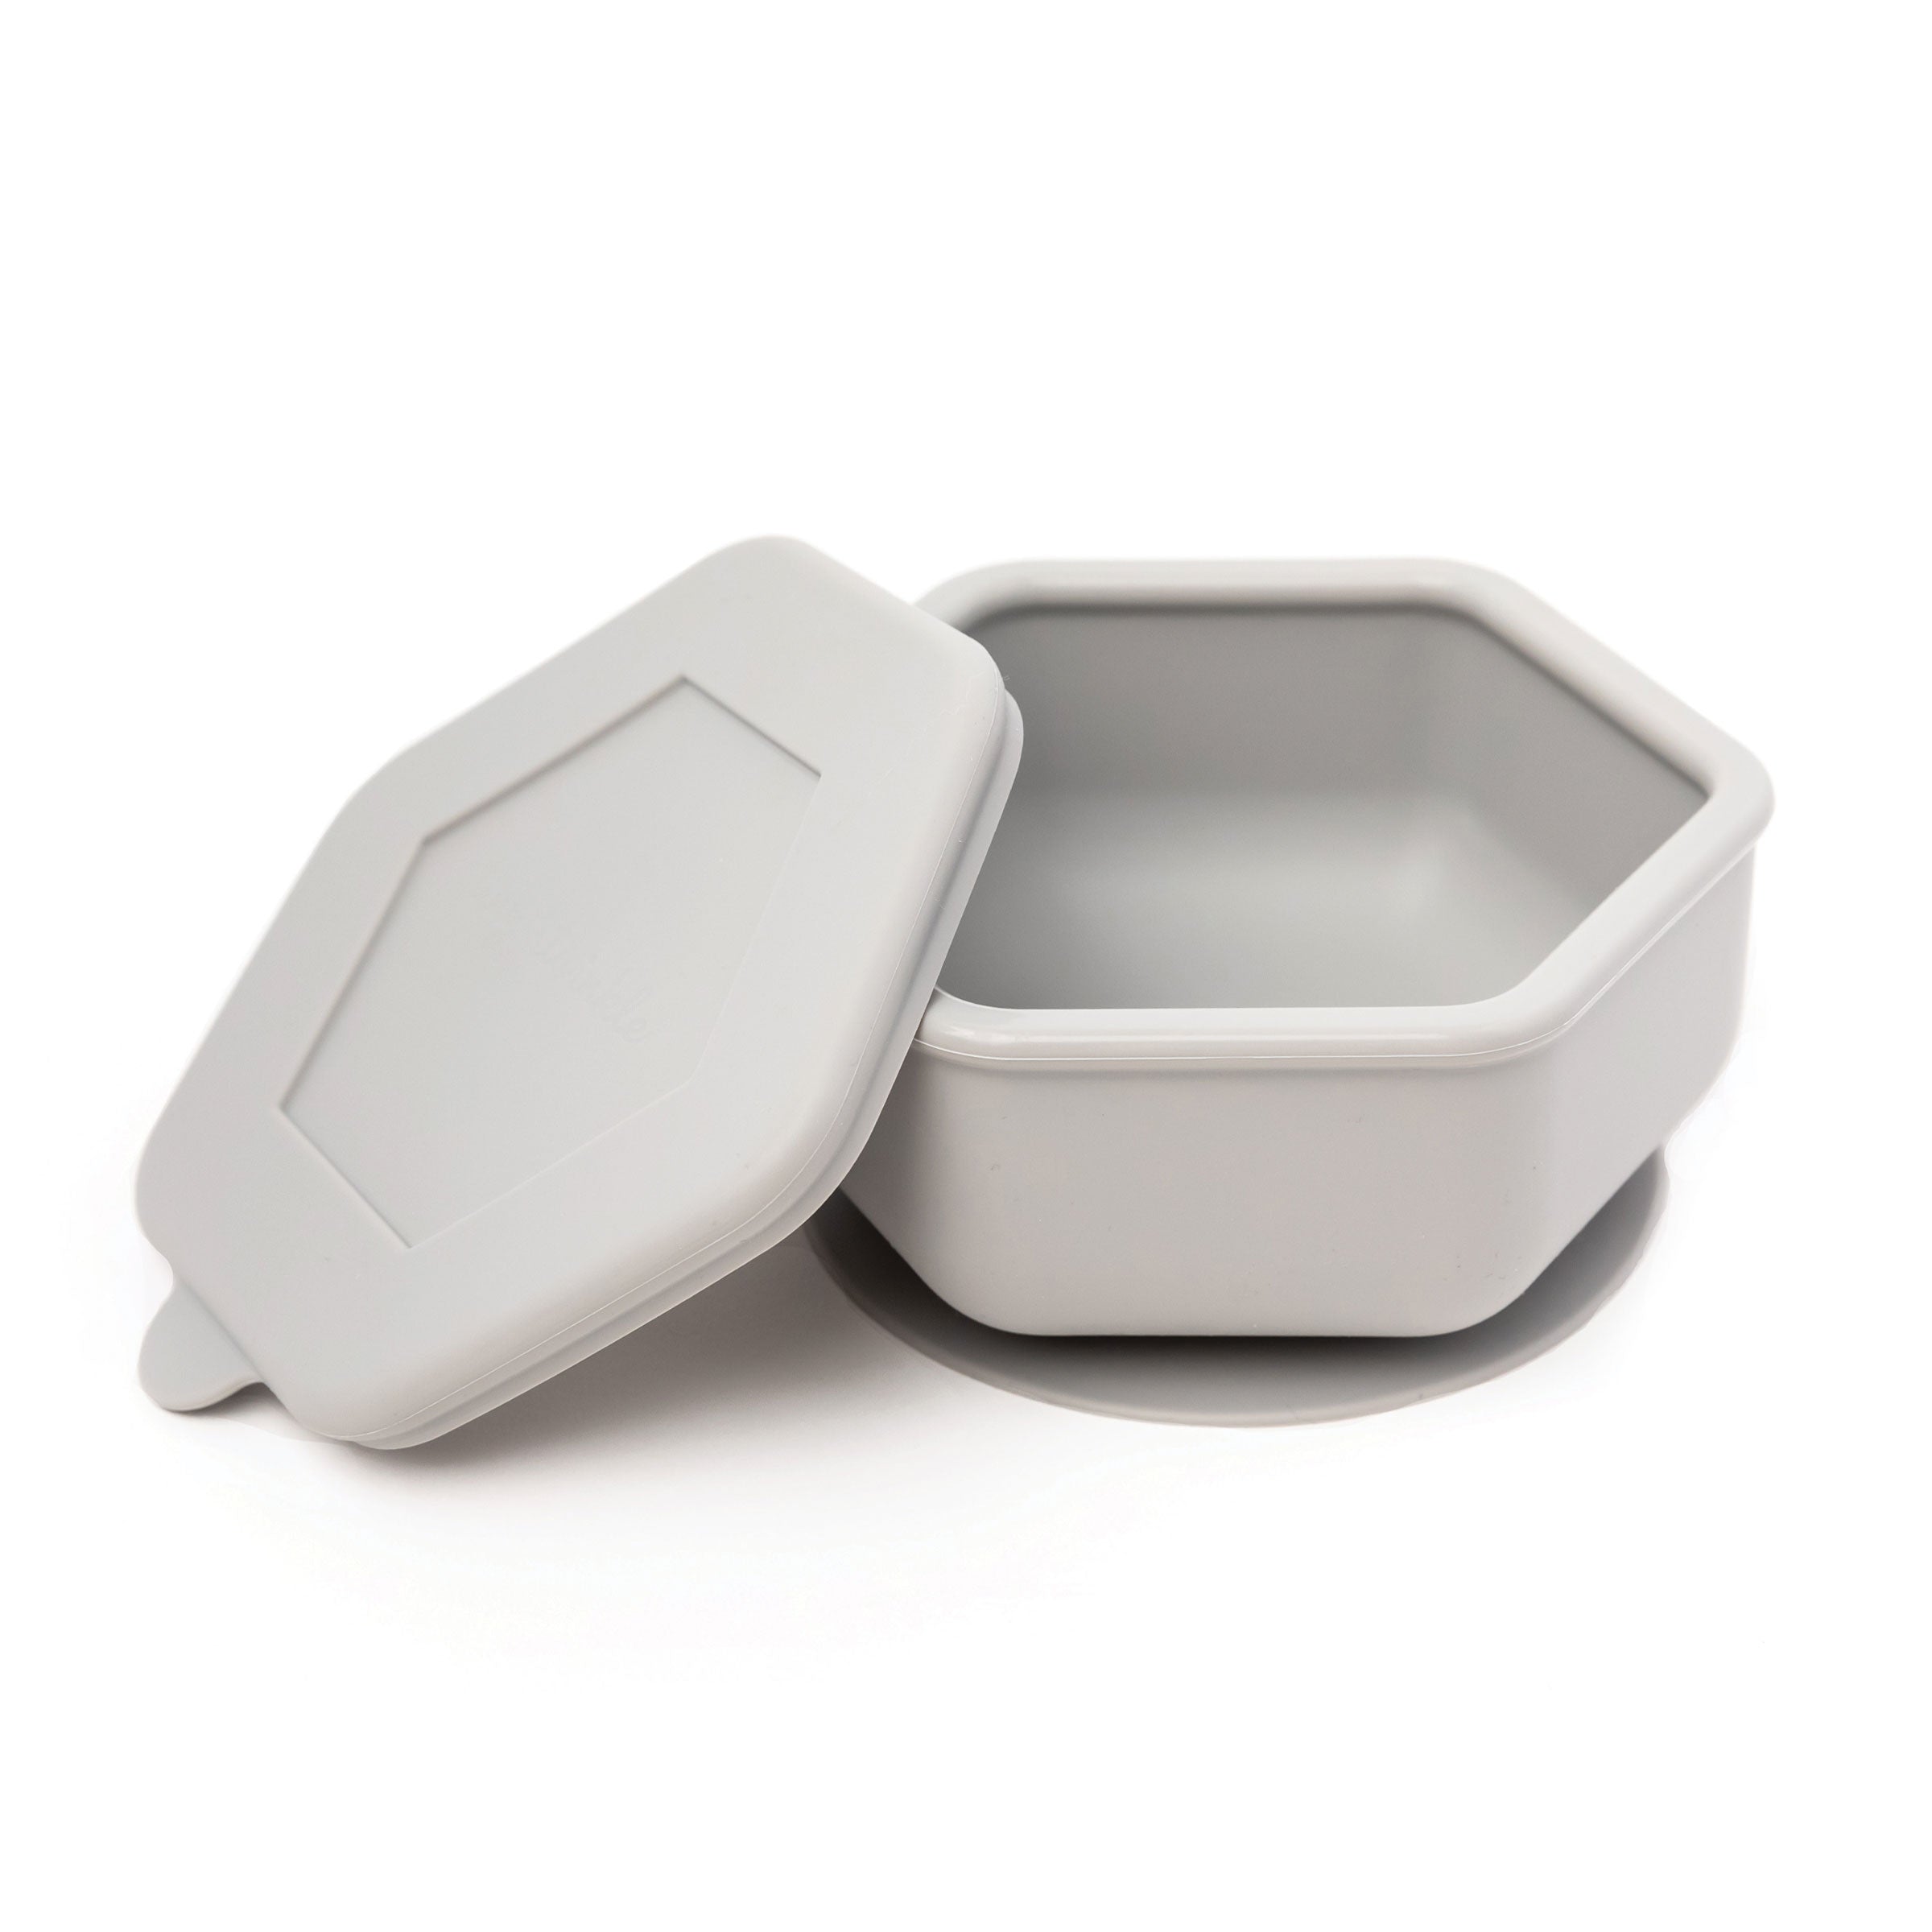 Silicone Suction Bowl and Lid Sets